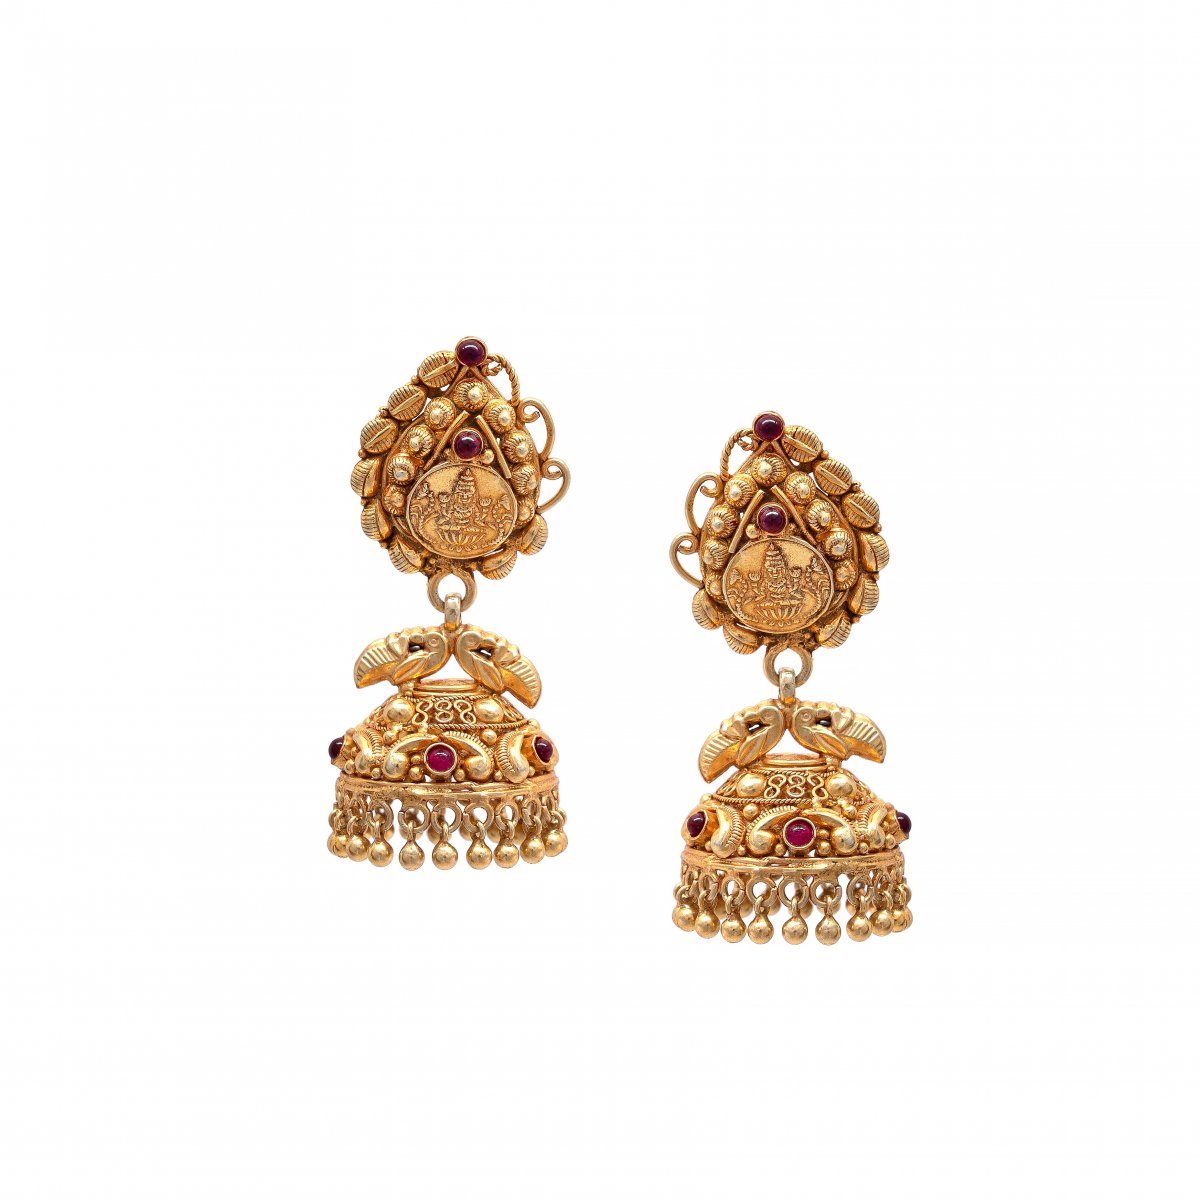 GOLD POLISHED SCREW BACK JHUMKAS FOR WOMEN